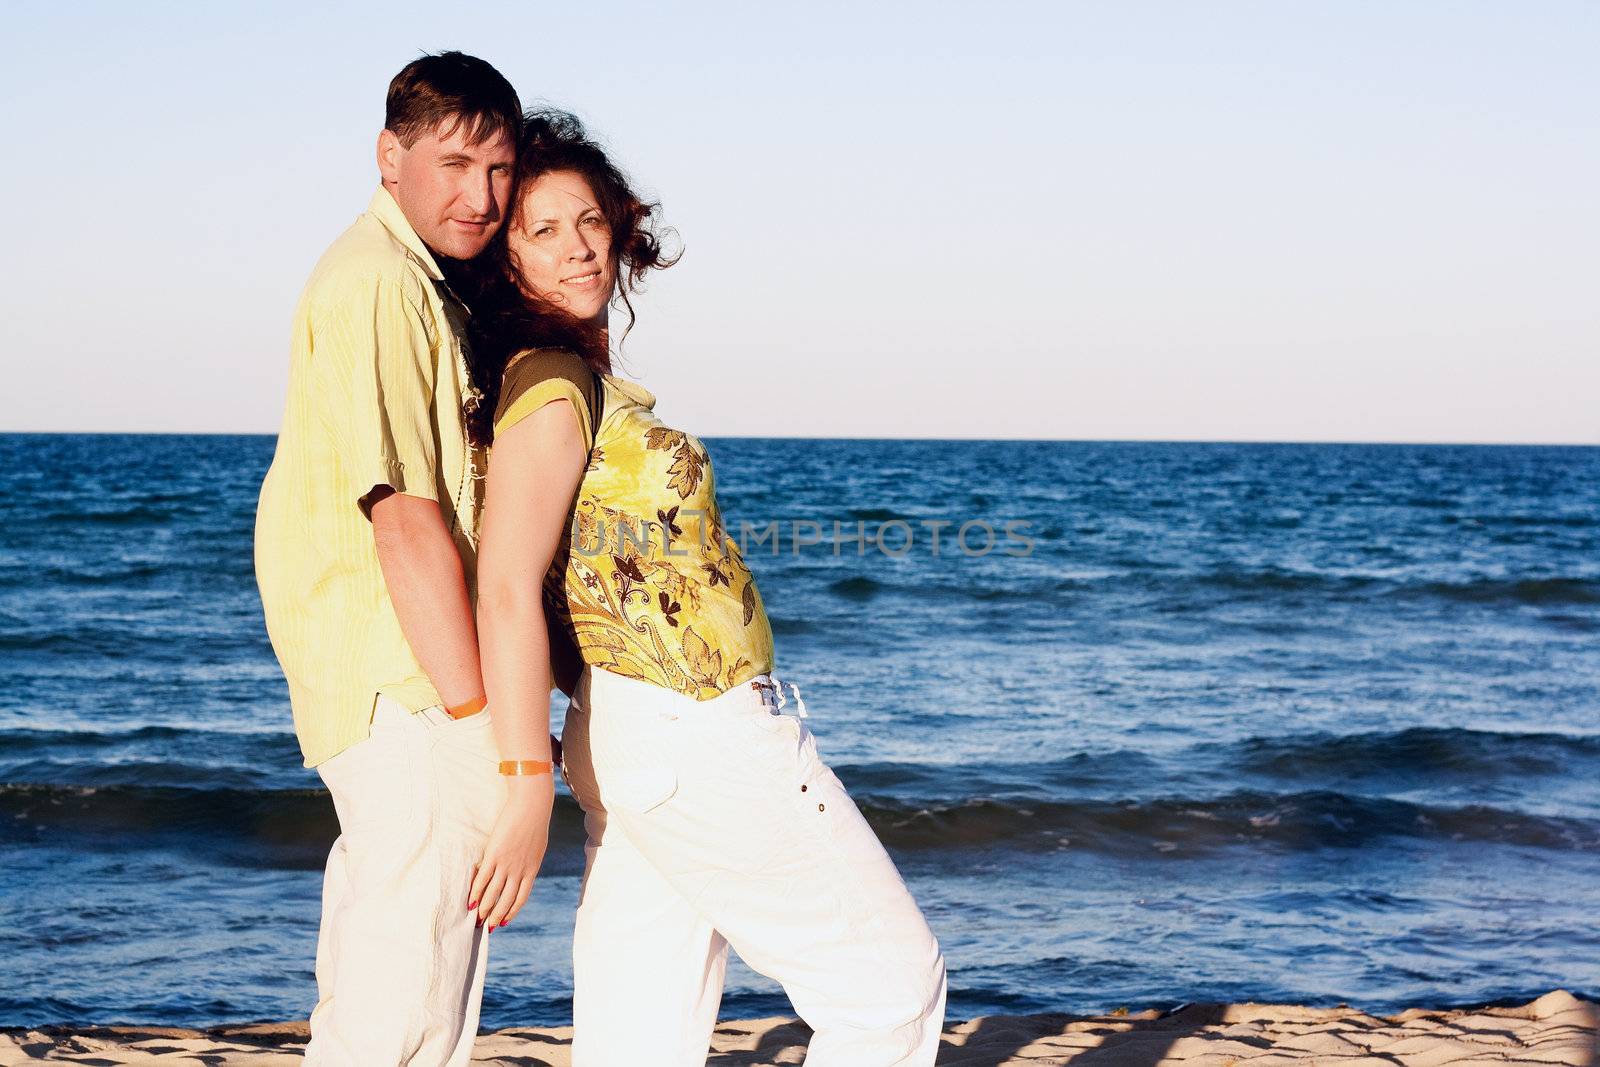 Man and Woman Couple In Romantic Embrace On Beach by Irina1977